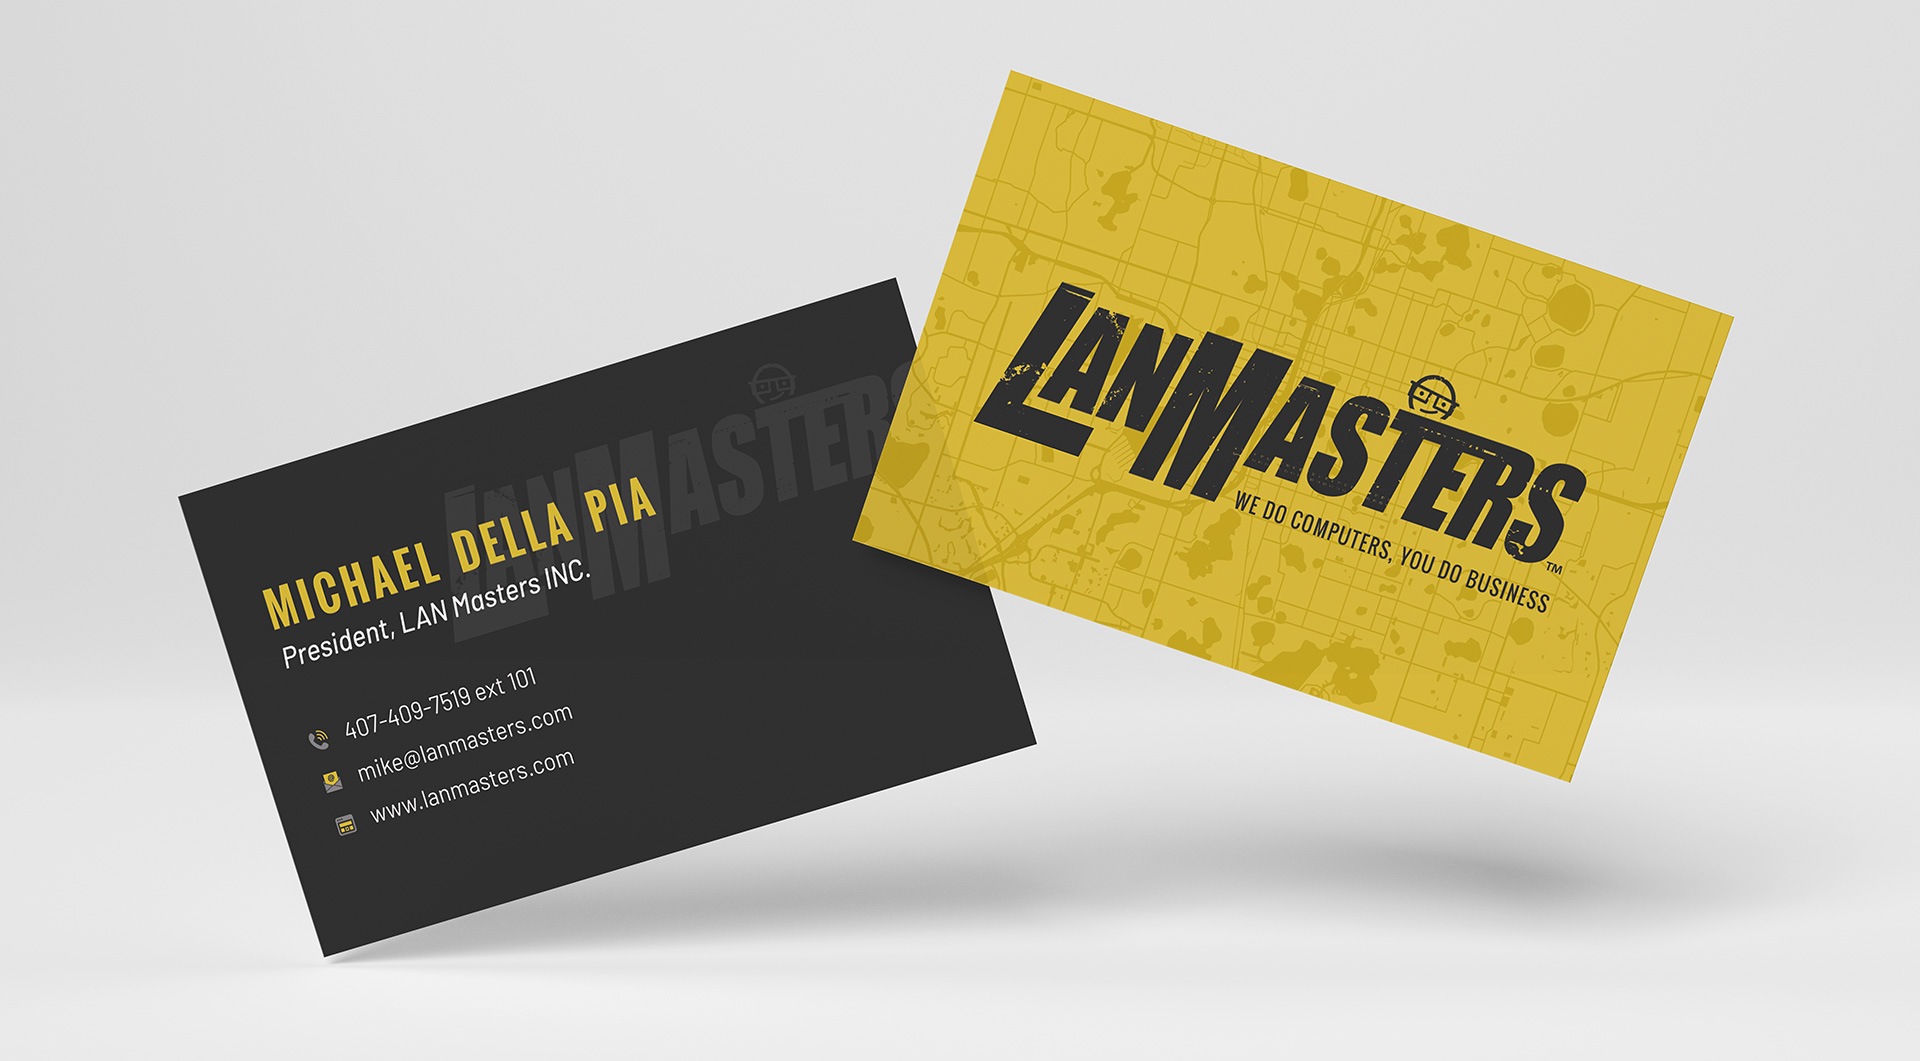 LanMasters business cards